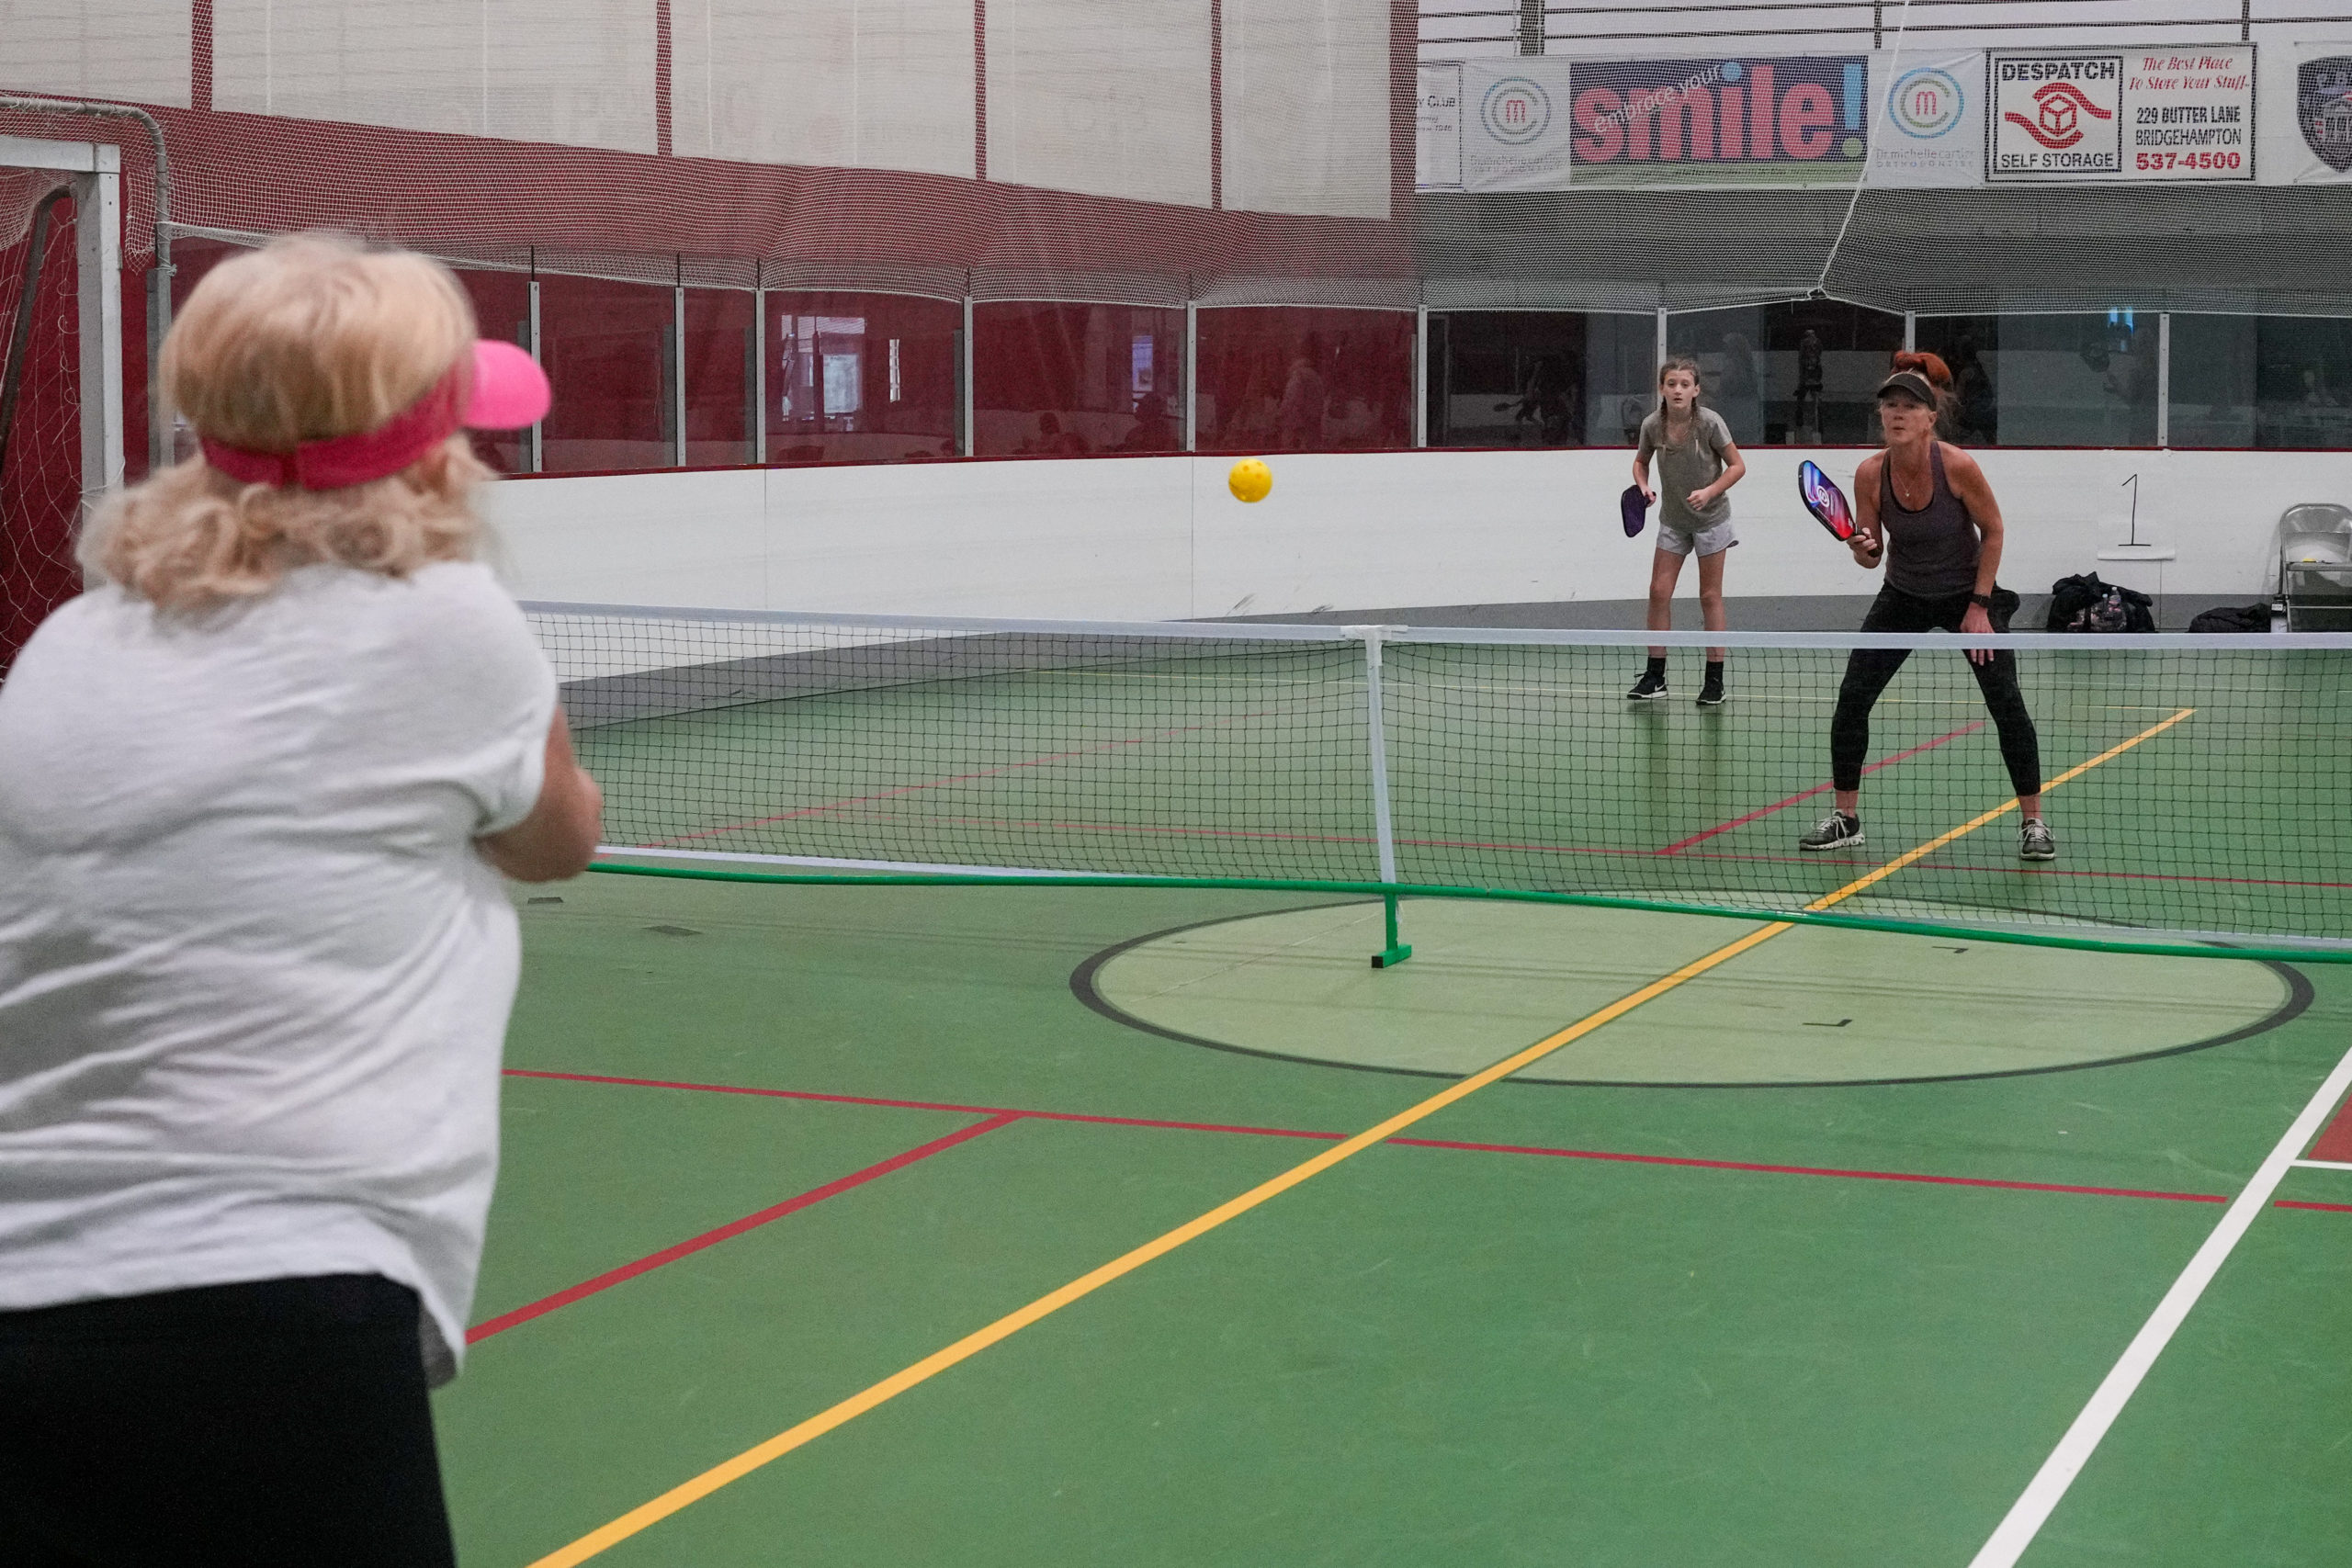 The inaugural Heart of the Hamptons SYS Pickleball Tournament on Saturday brought in players from Nassau County to Montauk and raised $5,000 for the Southampton-based charity organization.